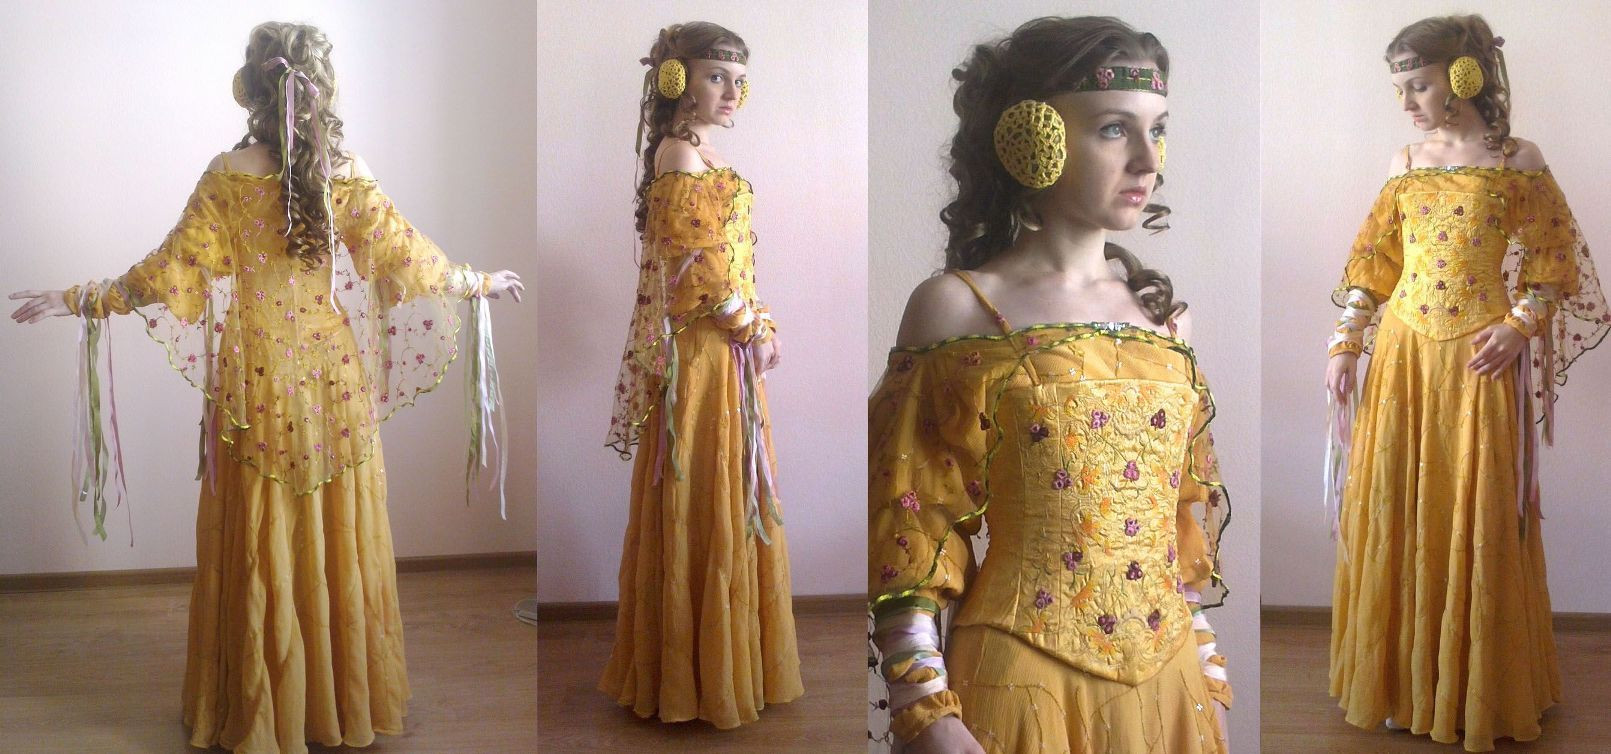 DIY Padme Costume
 Padme picnic gown AMAZING cosplay